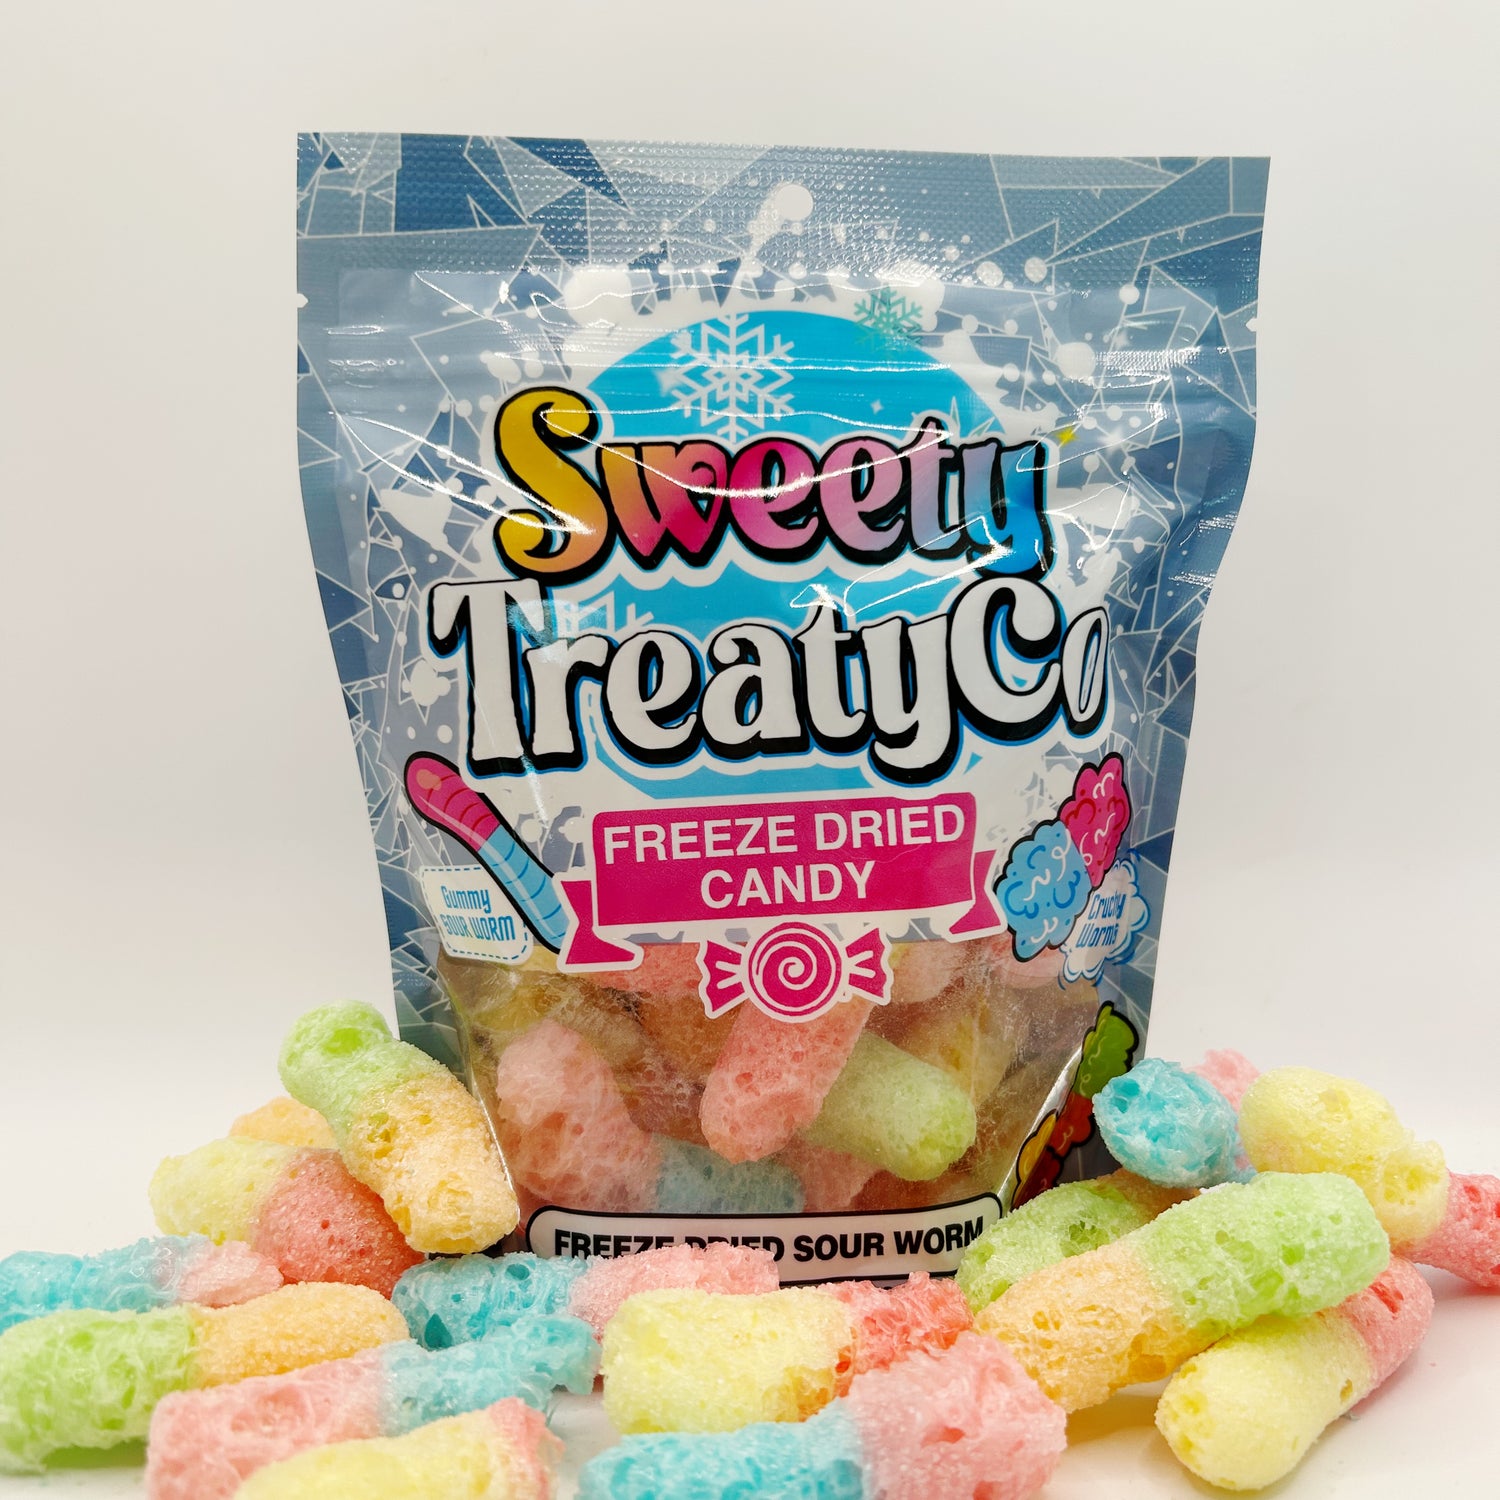 A colorful package of SweetyTreatyCo freeze-dried candy with various multicolored sour worm candy.